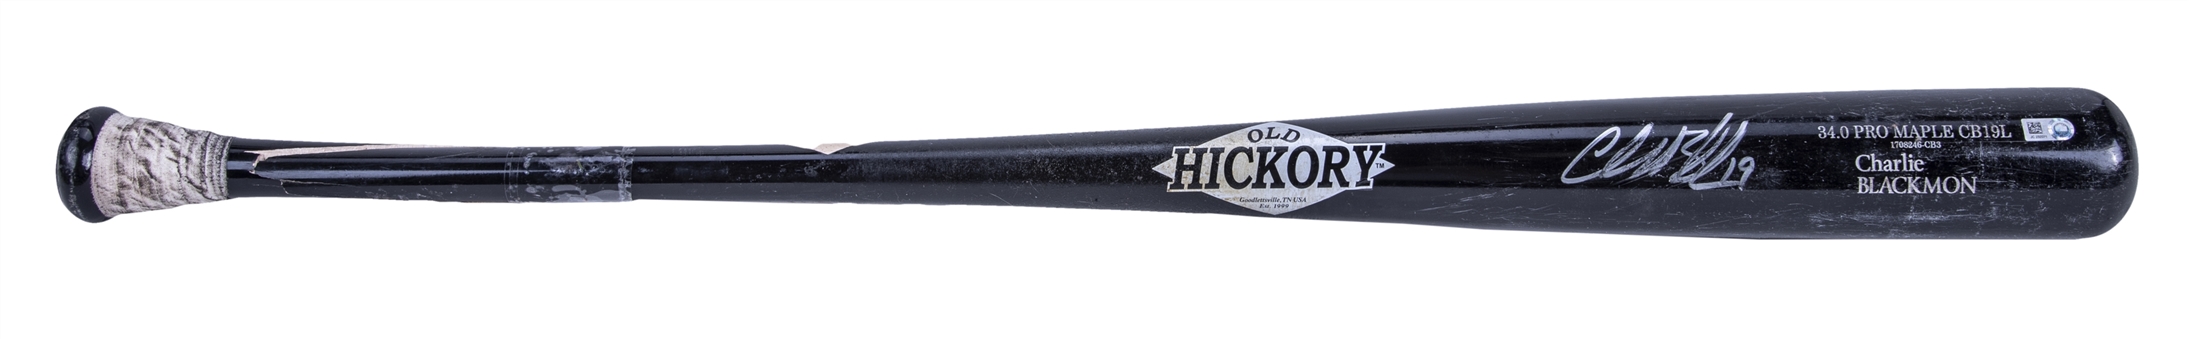 2017 Charlie Blackmon Game Used & Signed Old Hickory Model CB19L Bat (MLB Authenticated, PSA/DNA & Beckett)